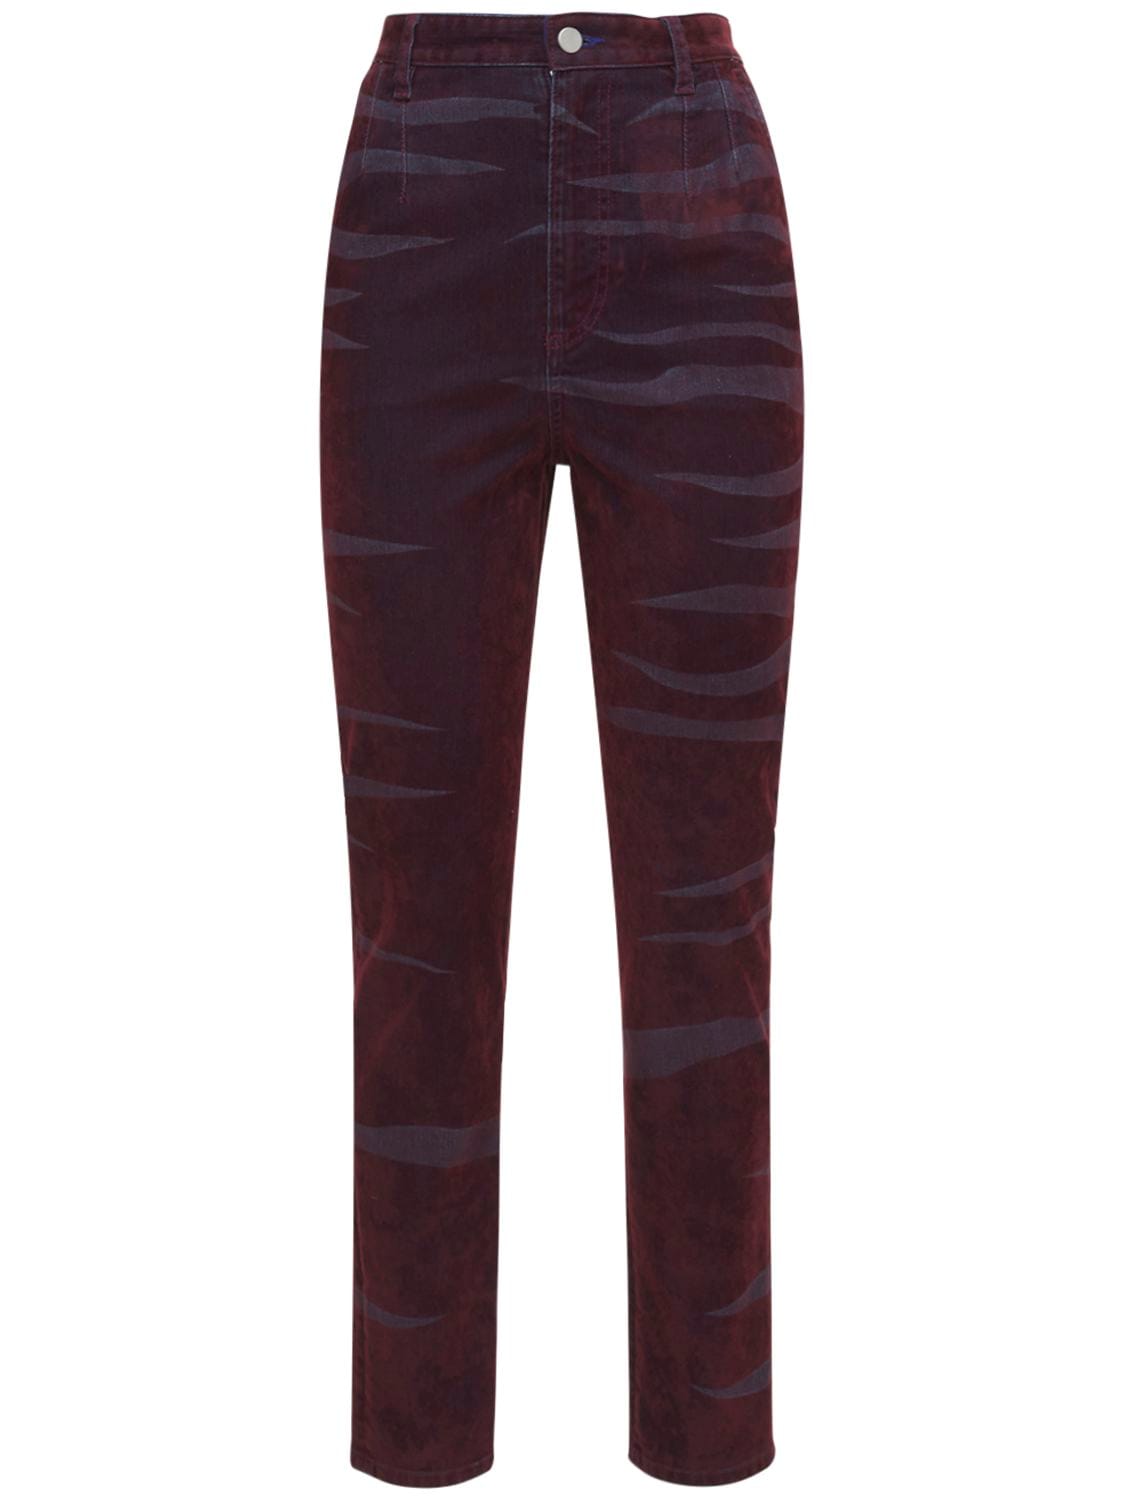 Slim Fit High Rise Jeans